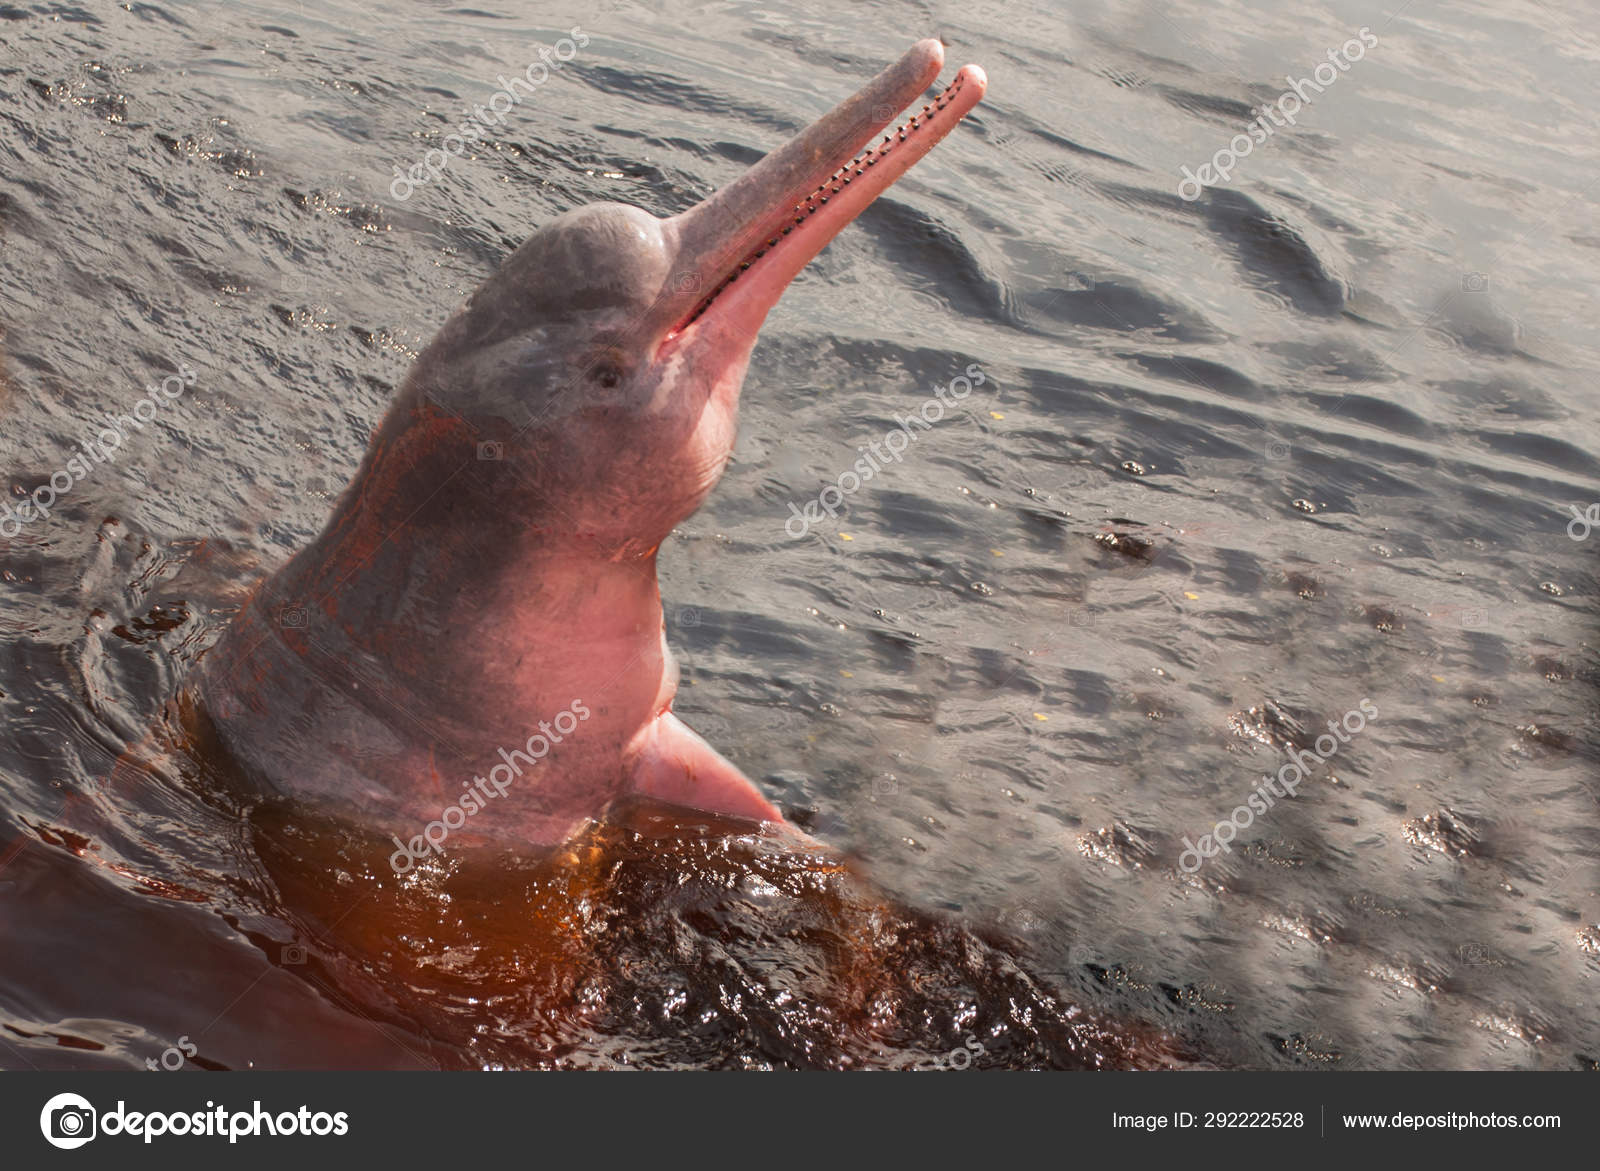 526 Pink Dolphin Stock Photos Free Royalty Free Pink Dolphin Images Depositphotos